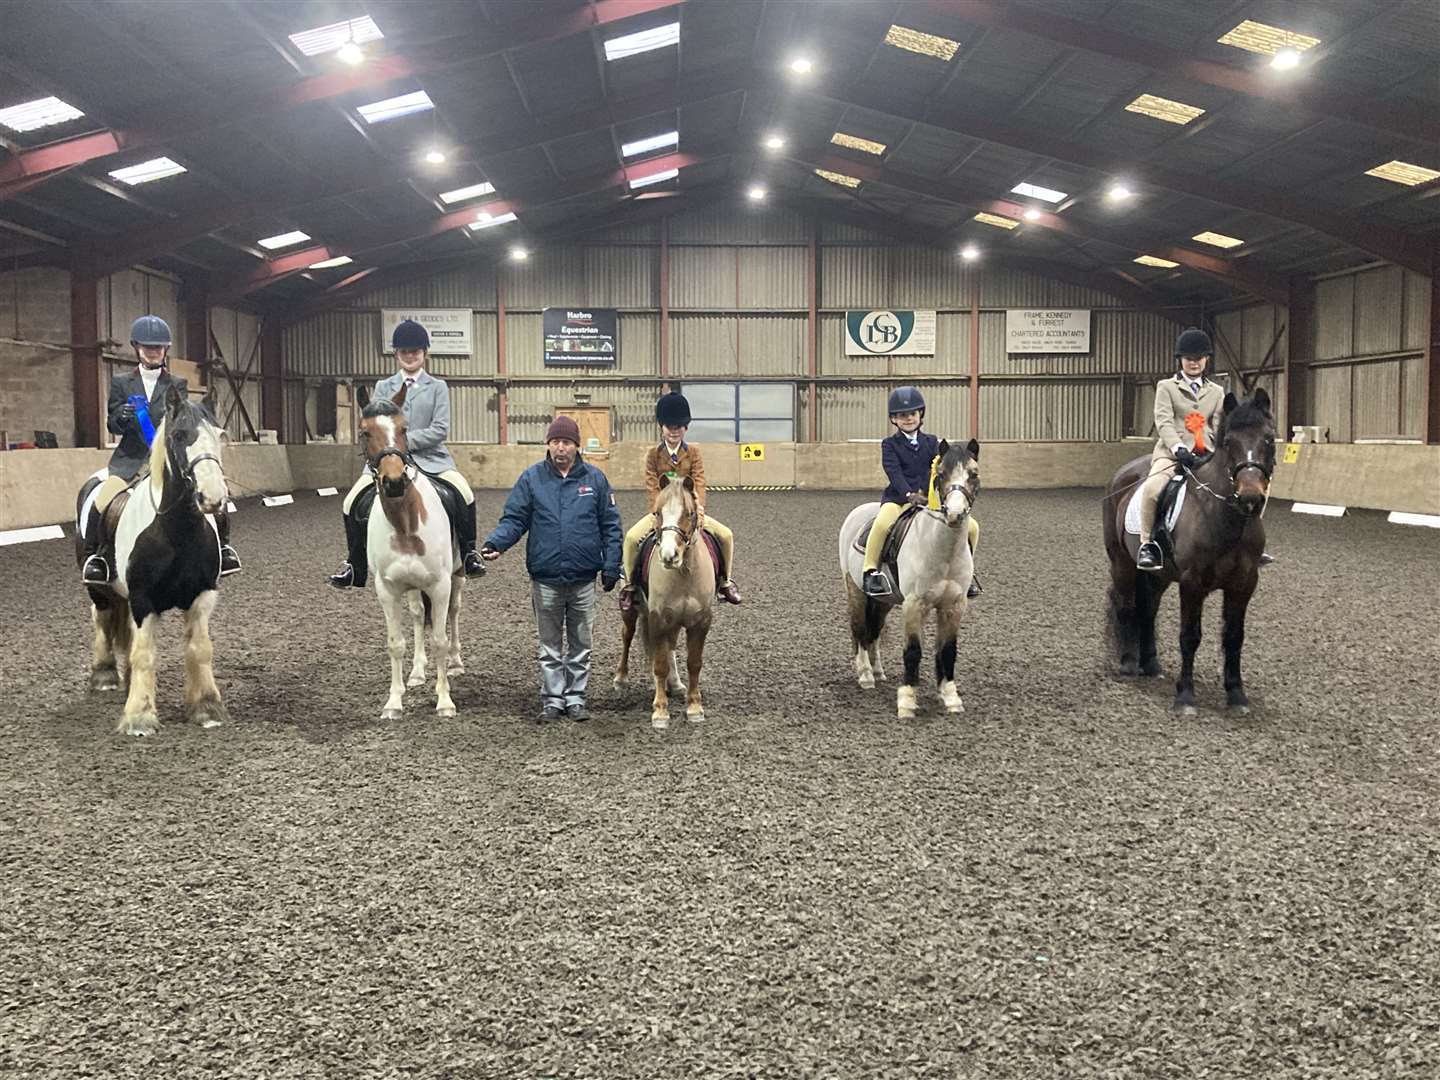 The competitors in the assisted D Level Dressage Test 2012 proudly show off their rosettes. From left to right: Jaicee Johnson, Jojo, Gina Cowe, Poppy, judge Stephen Cruickshank, Darcey Alexander, Titch, Rachel MacGregor, Dandy, and Sophie Thomson, Whisky.